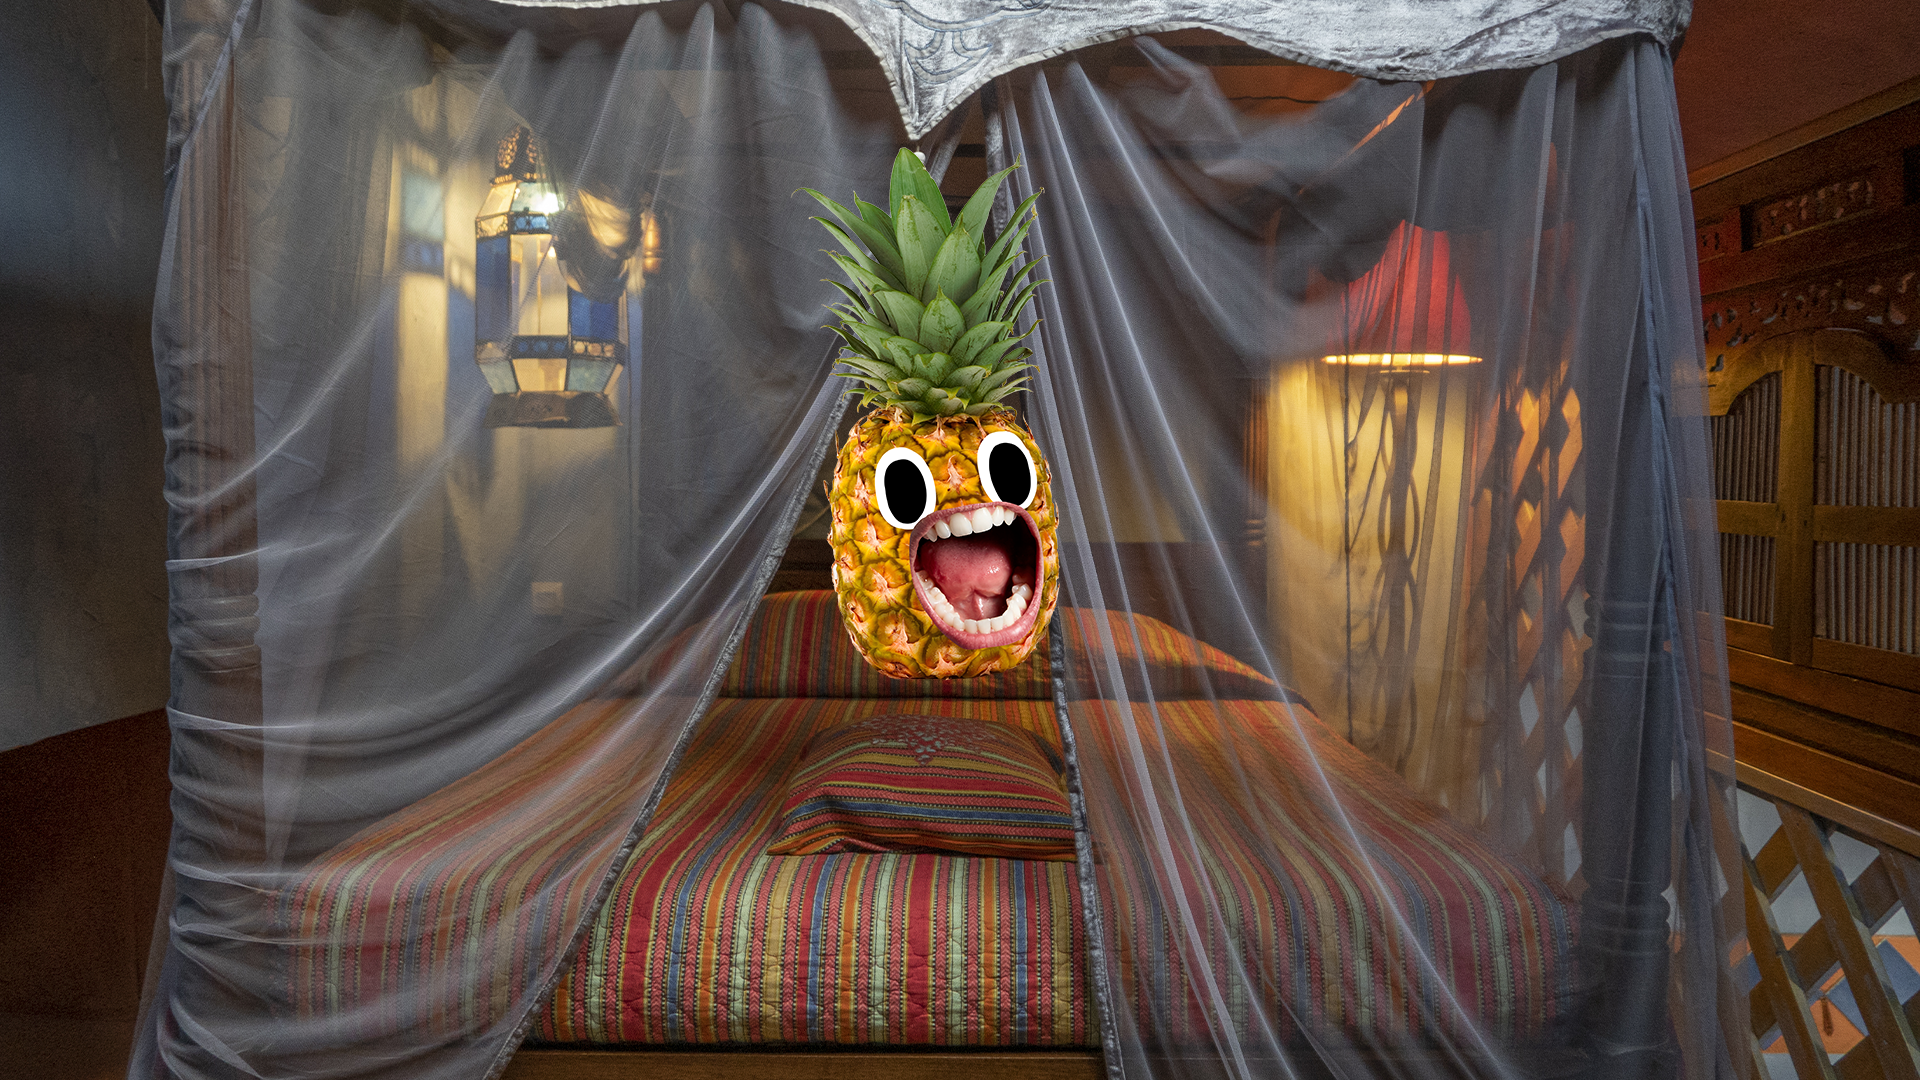 Screaming Pineapple on four poster bed